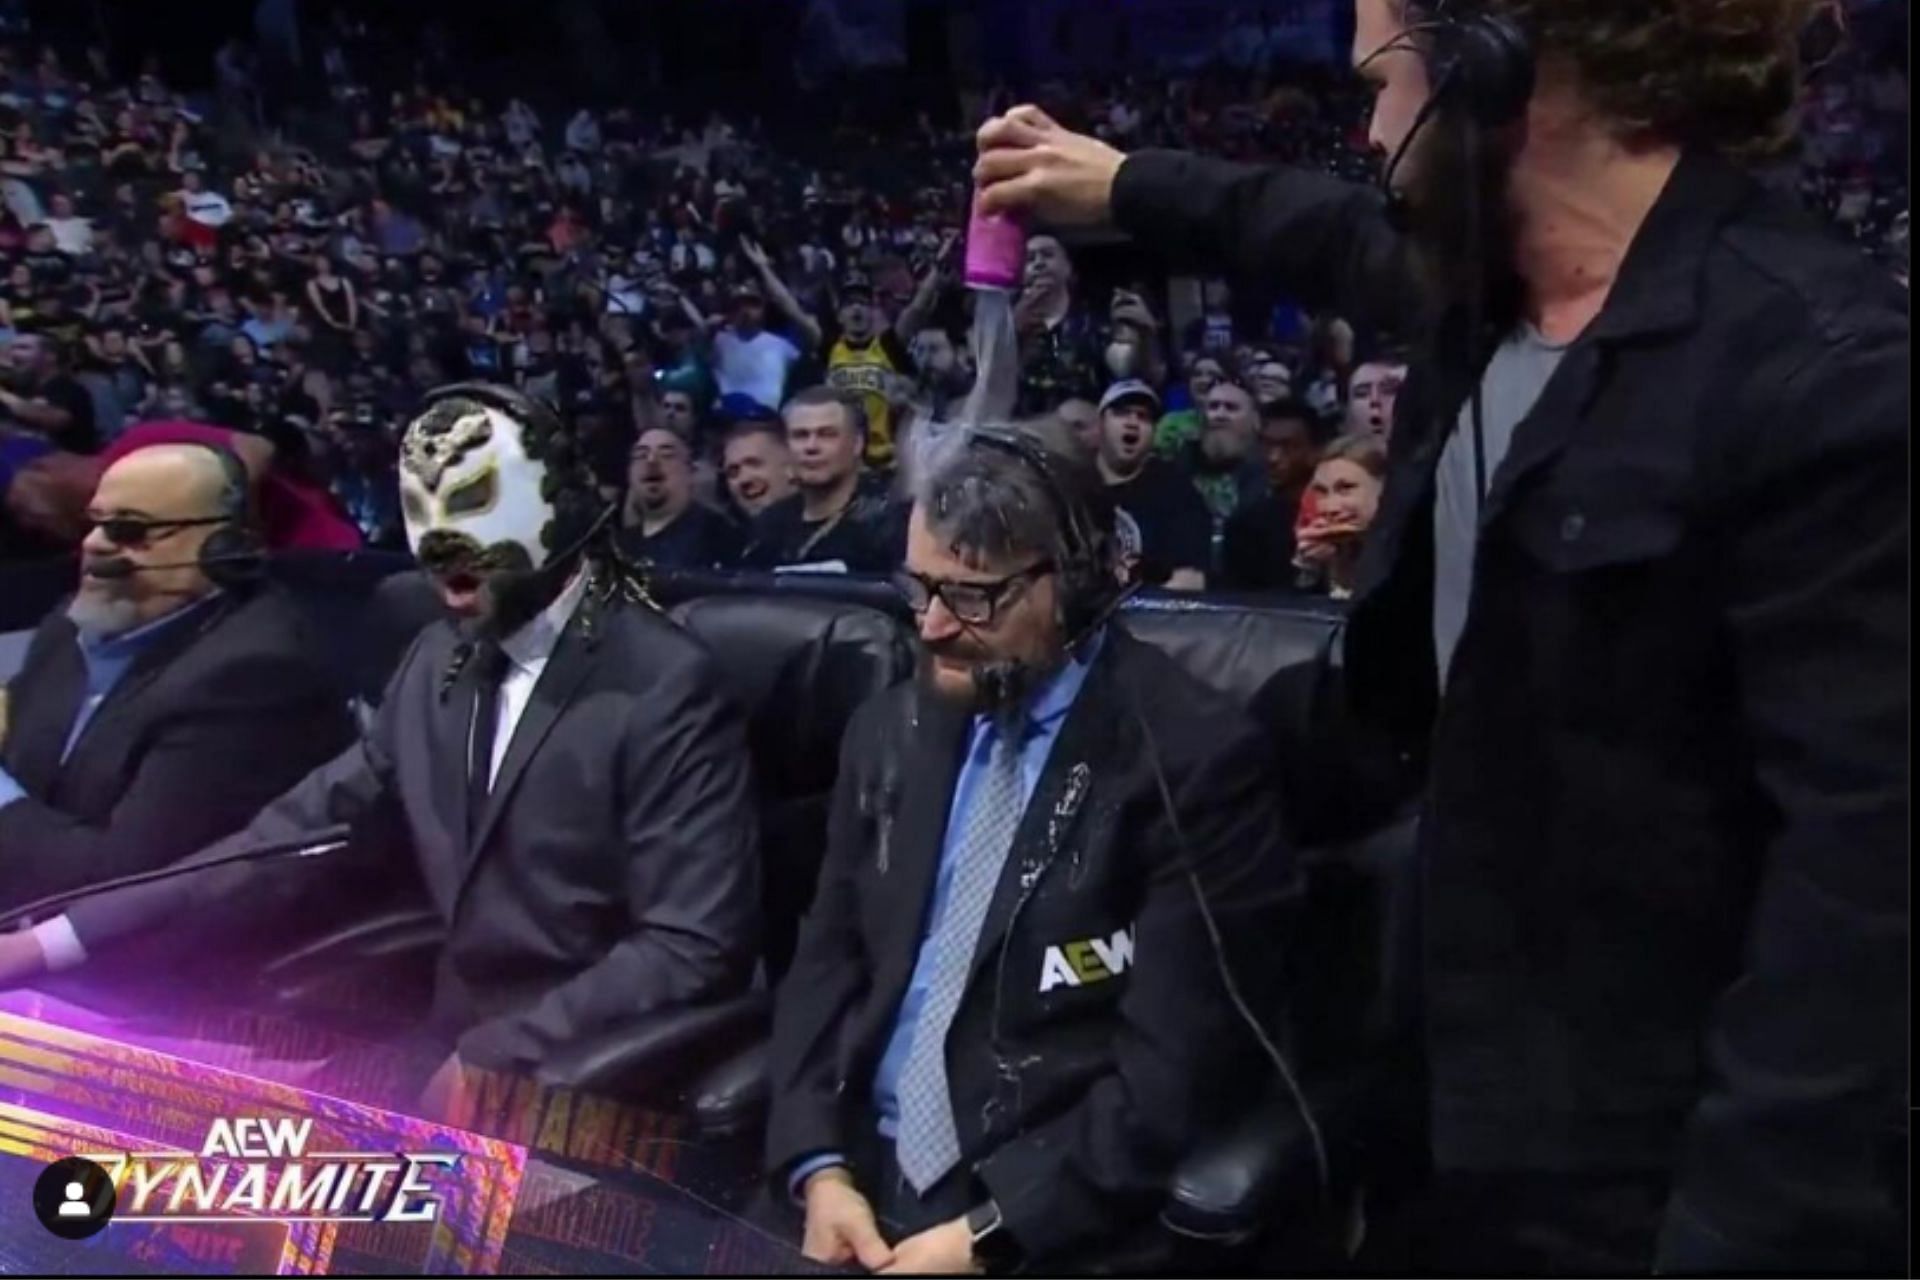 Tony Schiavone comments about a current AEW wrestling retiring